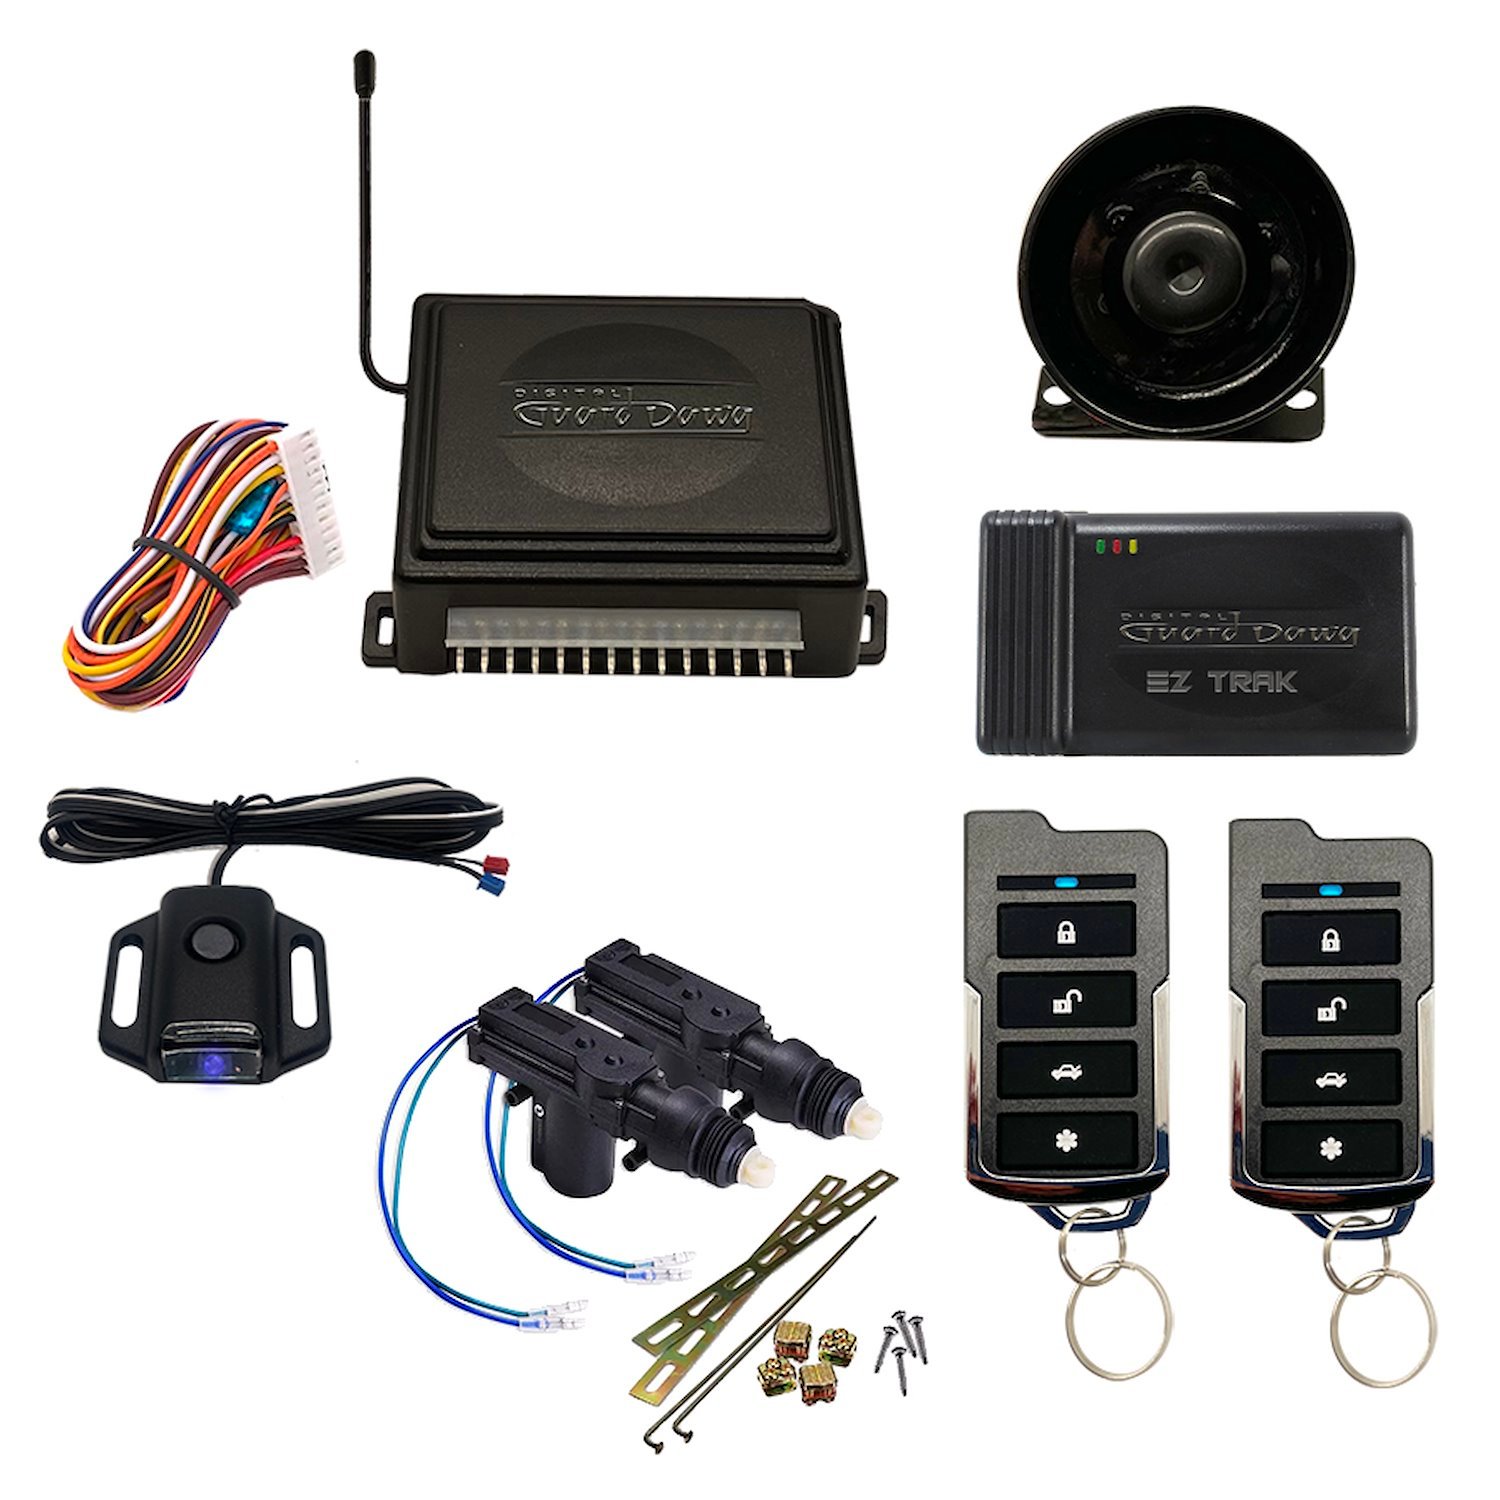 DGD-KY-2A-EZ Keyless Entry w/2-Door Actuator Kit and Smart Phone EZ-Tracking